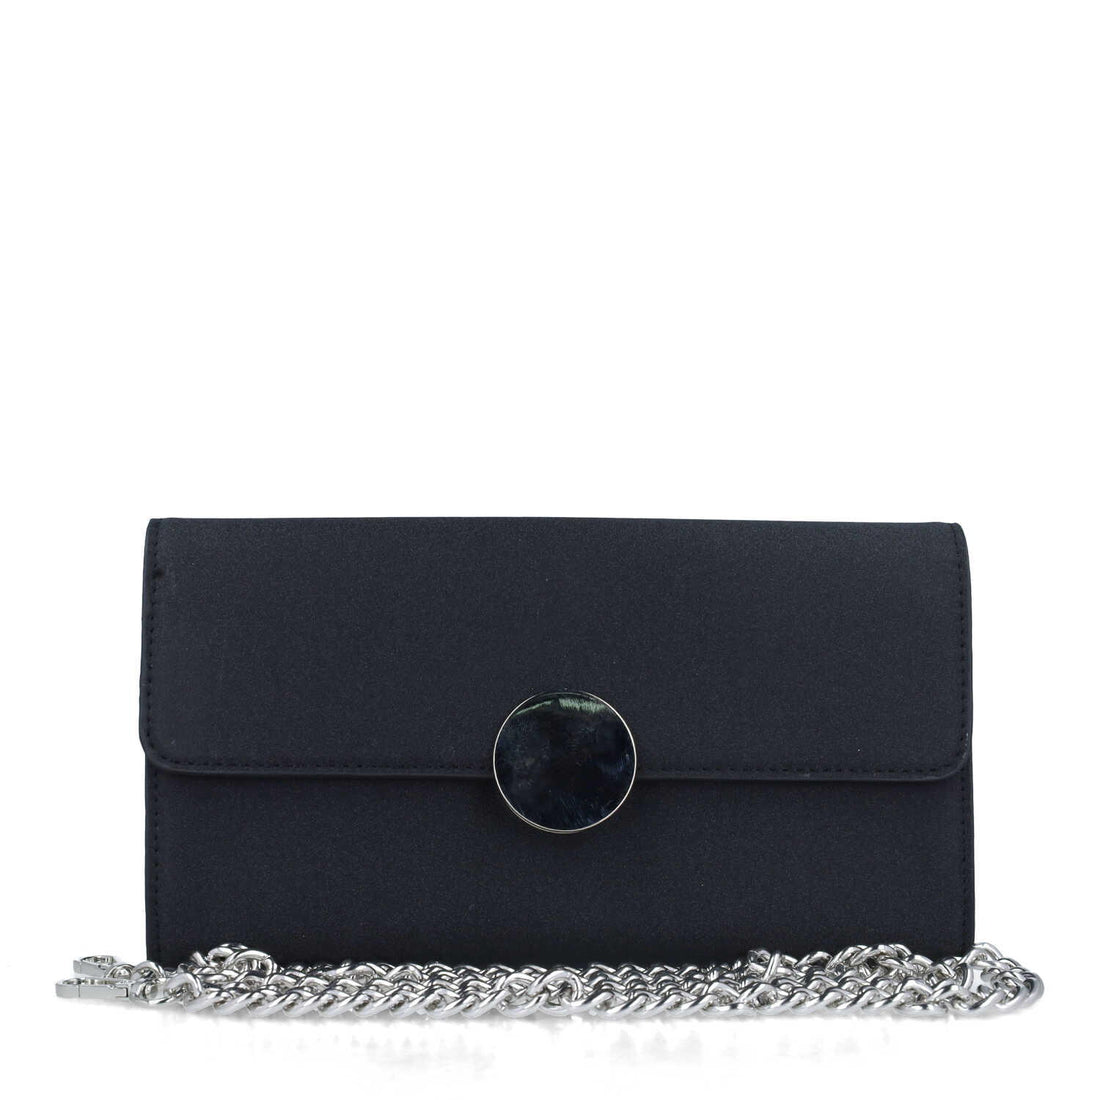 Black Clutch Bag With Chain Strap_85712_01_01